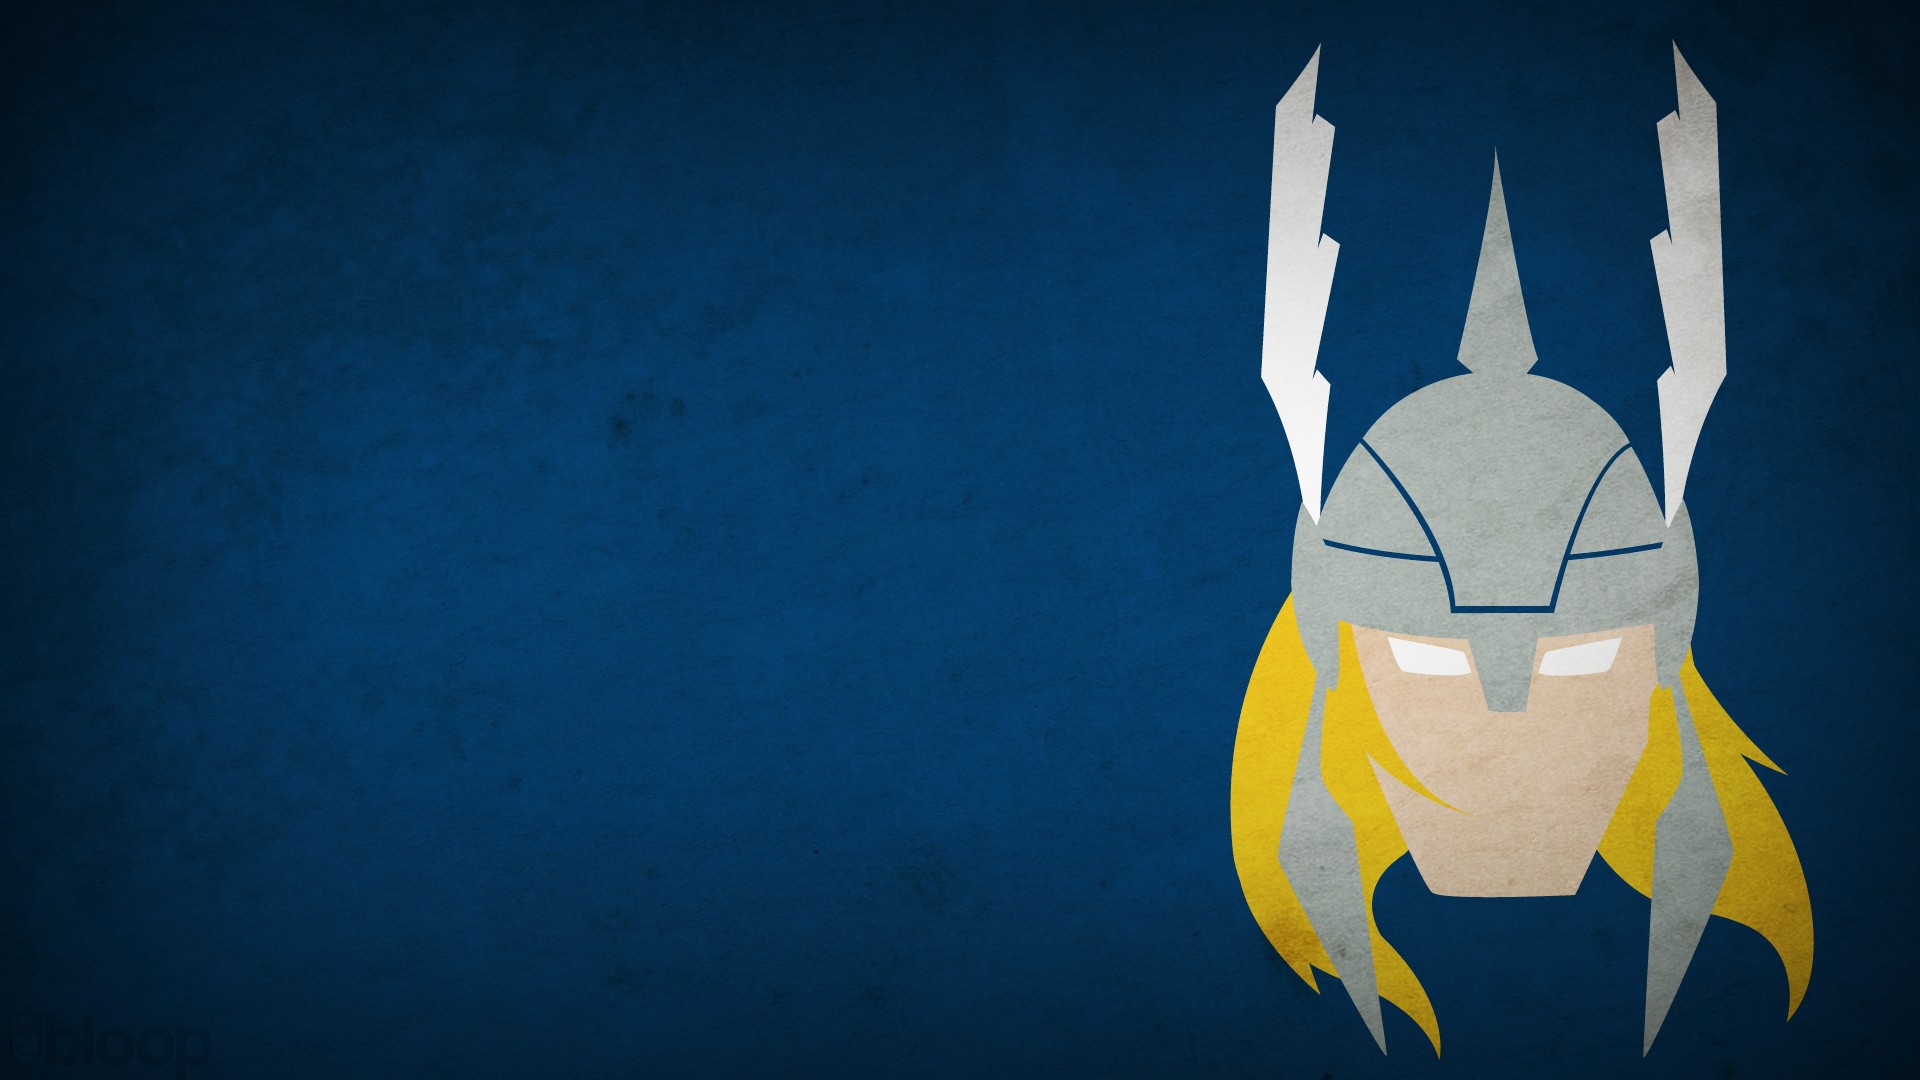 30 Awesome Superheroes Minimalist Wallpapers